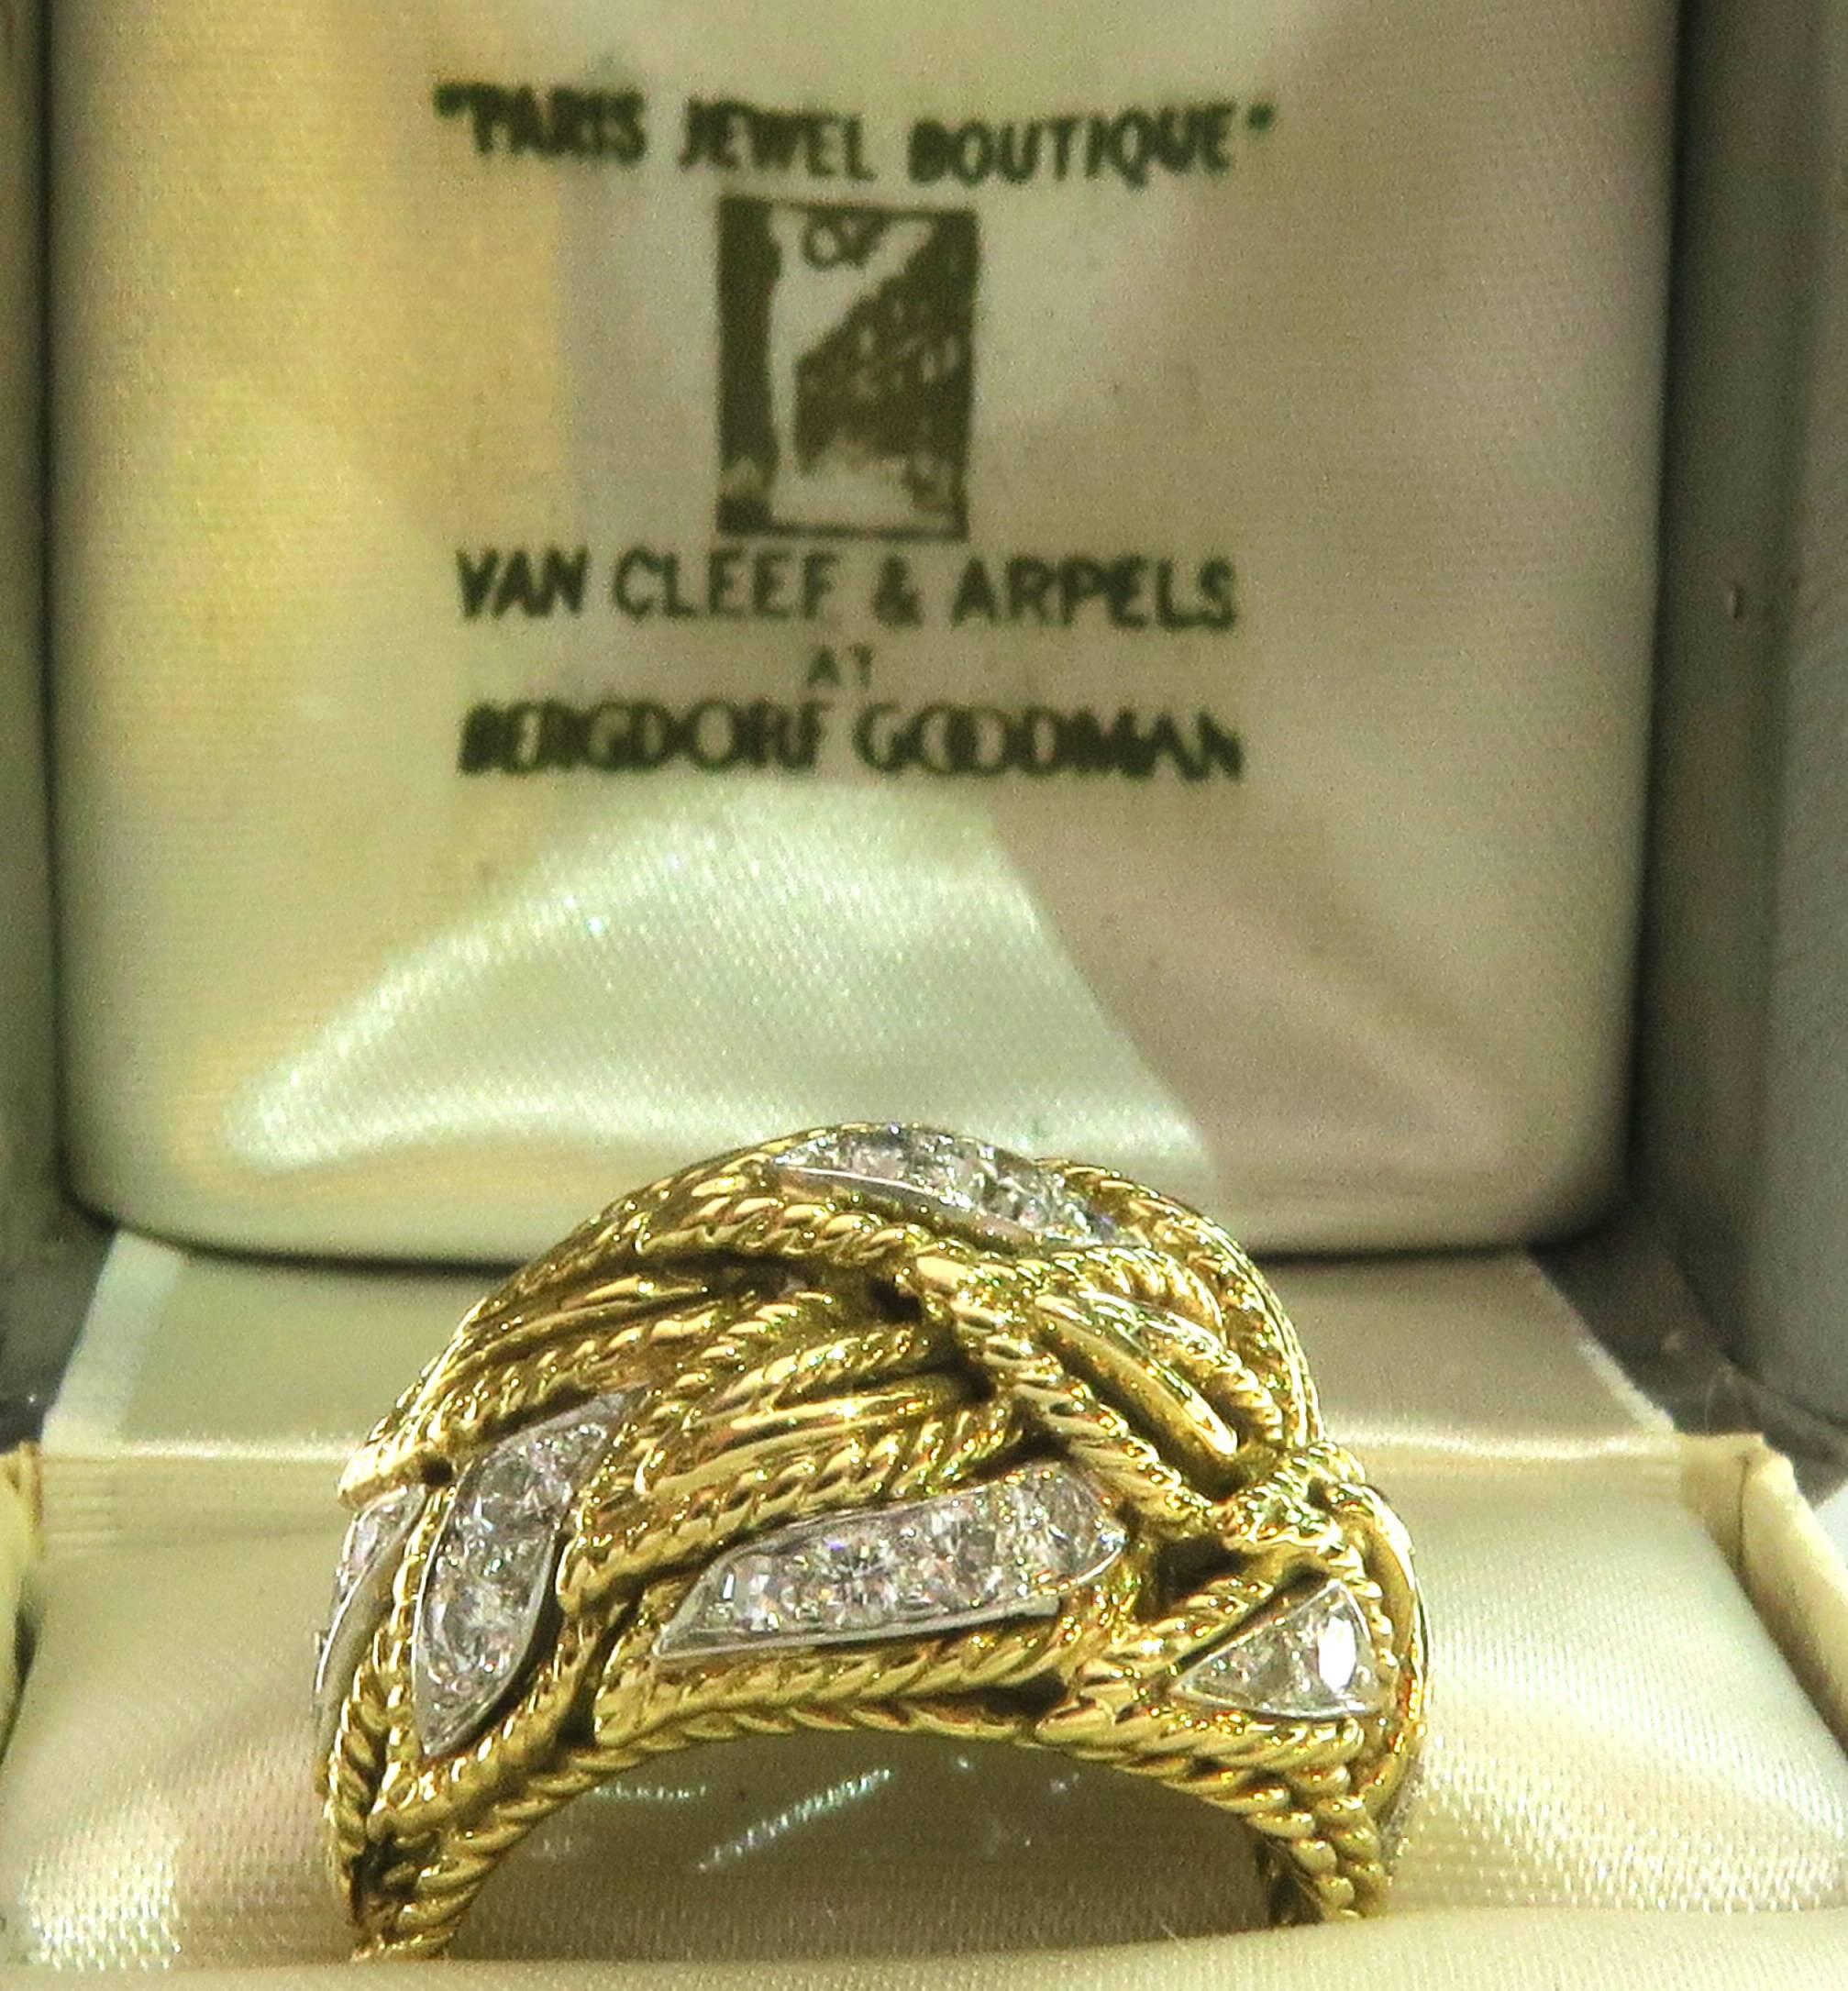 18 Karat classic Van Cleef and Arpels. This ring has Diamonds set in a layered Leaf domed design and comes in it's original box as pictured. This incredible collectible 1960's ring has everything that VCA is known for, unmatched style, design and